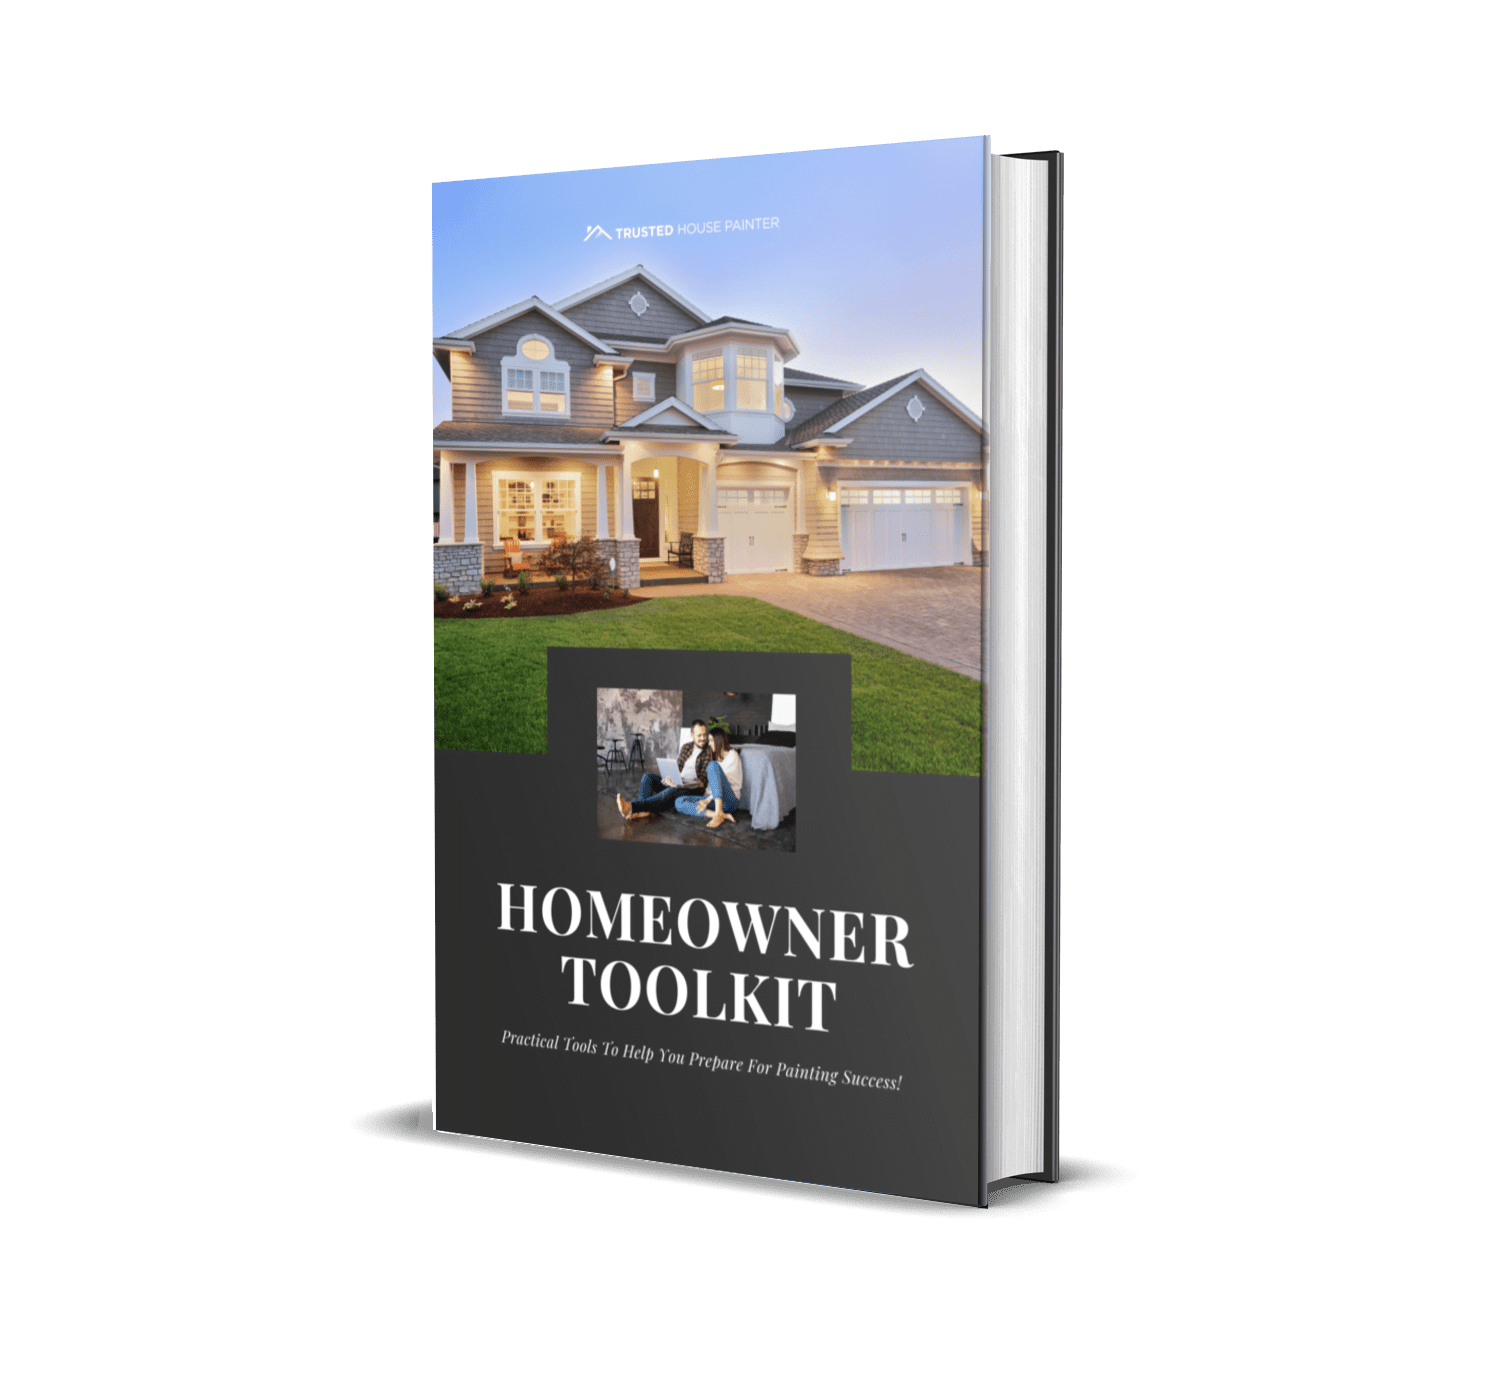 Homeowner Toolkit Resource For Painting Your Home